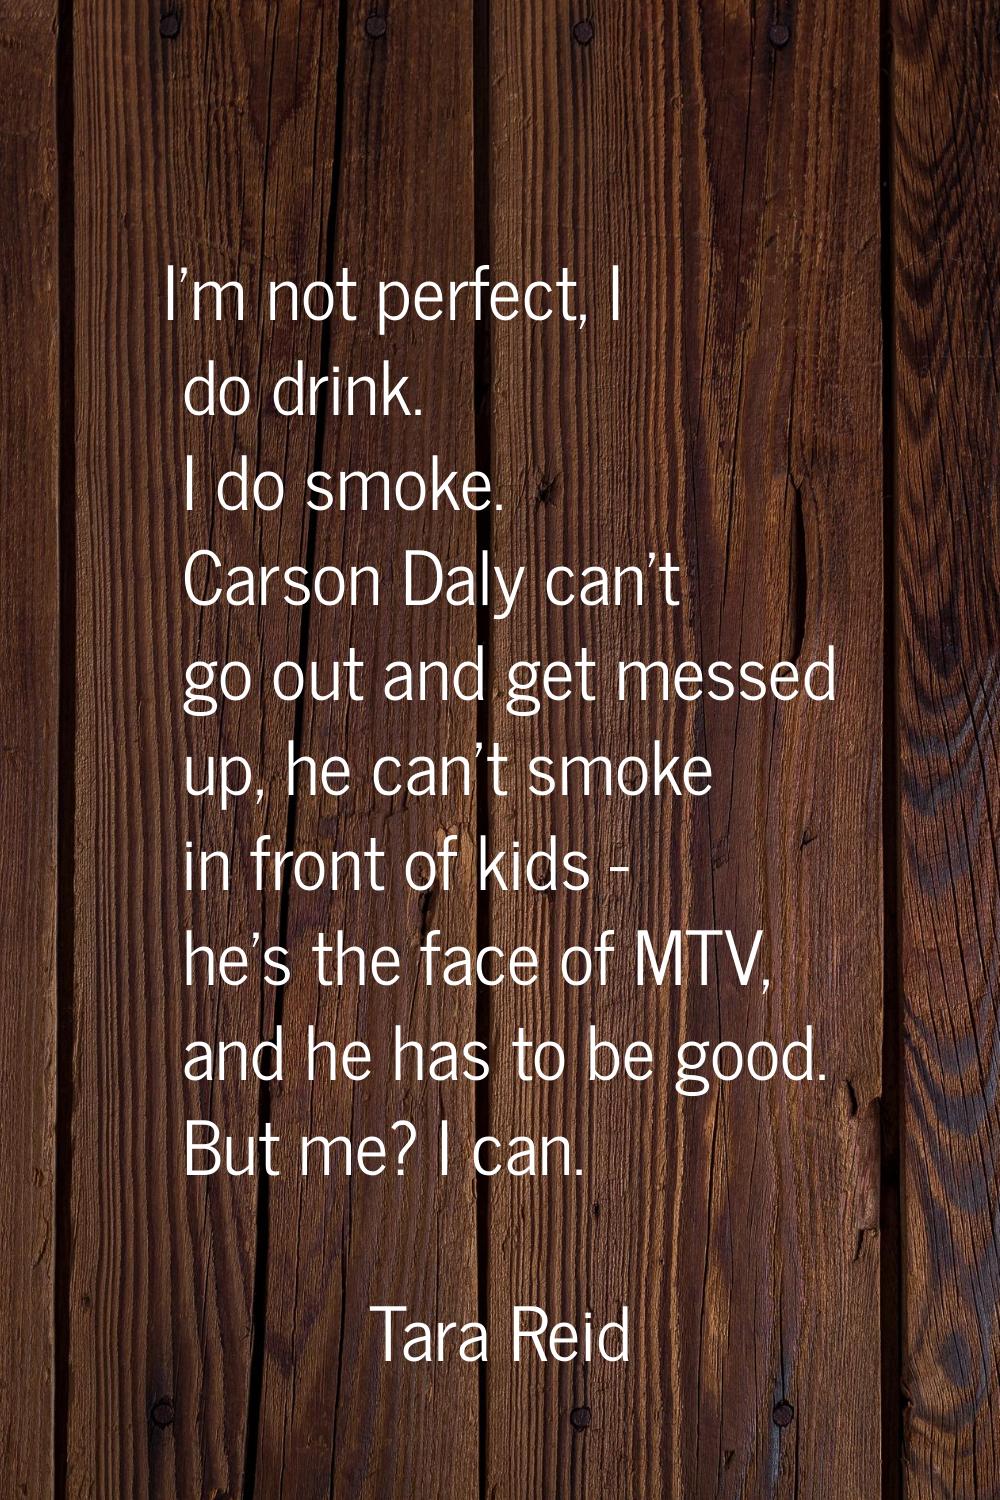 I'm not perfect, I do drink. I do smoke. Carson Daly can't go out and get messed up, he can't smoke